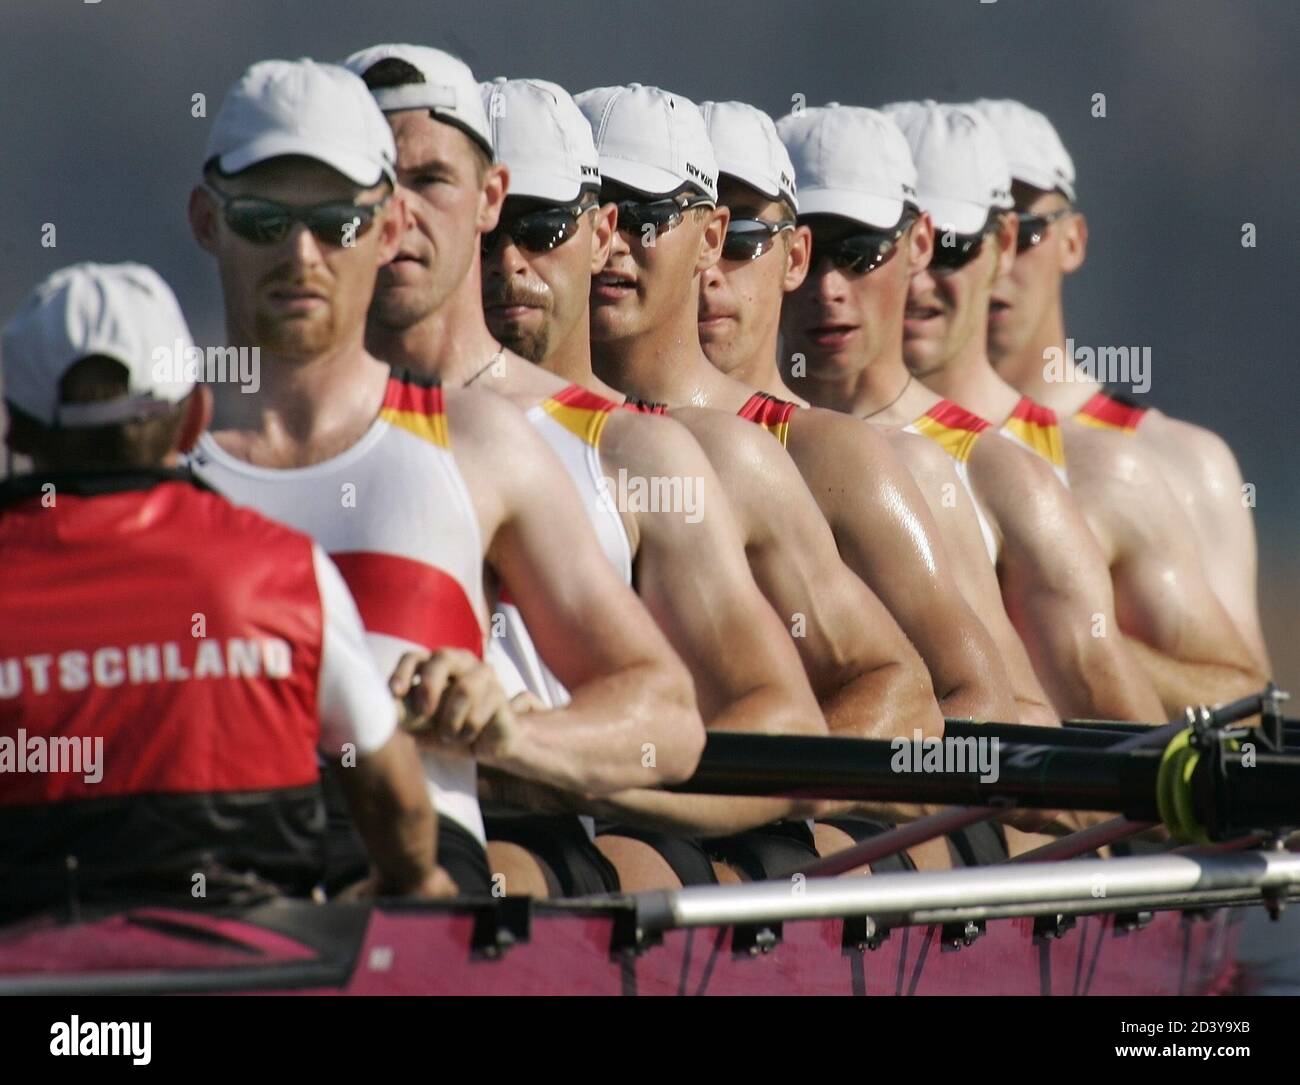 The German men's eights are all in unison as they train at the Schinias Olympic Rowing Centre northeast of Athens August 13, 2004. The Rowing competition for the Athens 2004 Olympic Games begins August 14. REUTERS/Andy Clark  AC/SV Stock Photo